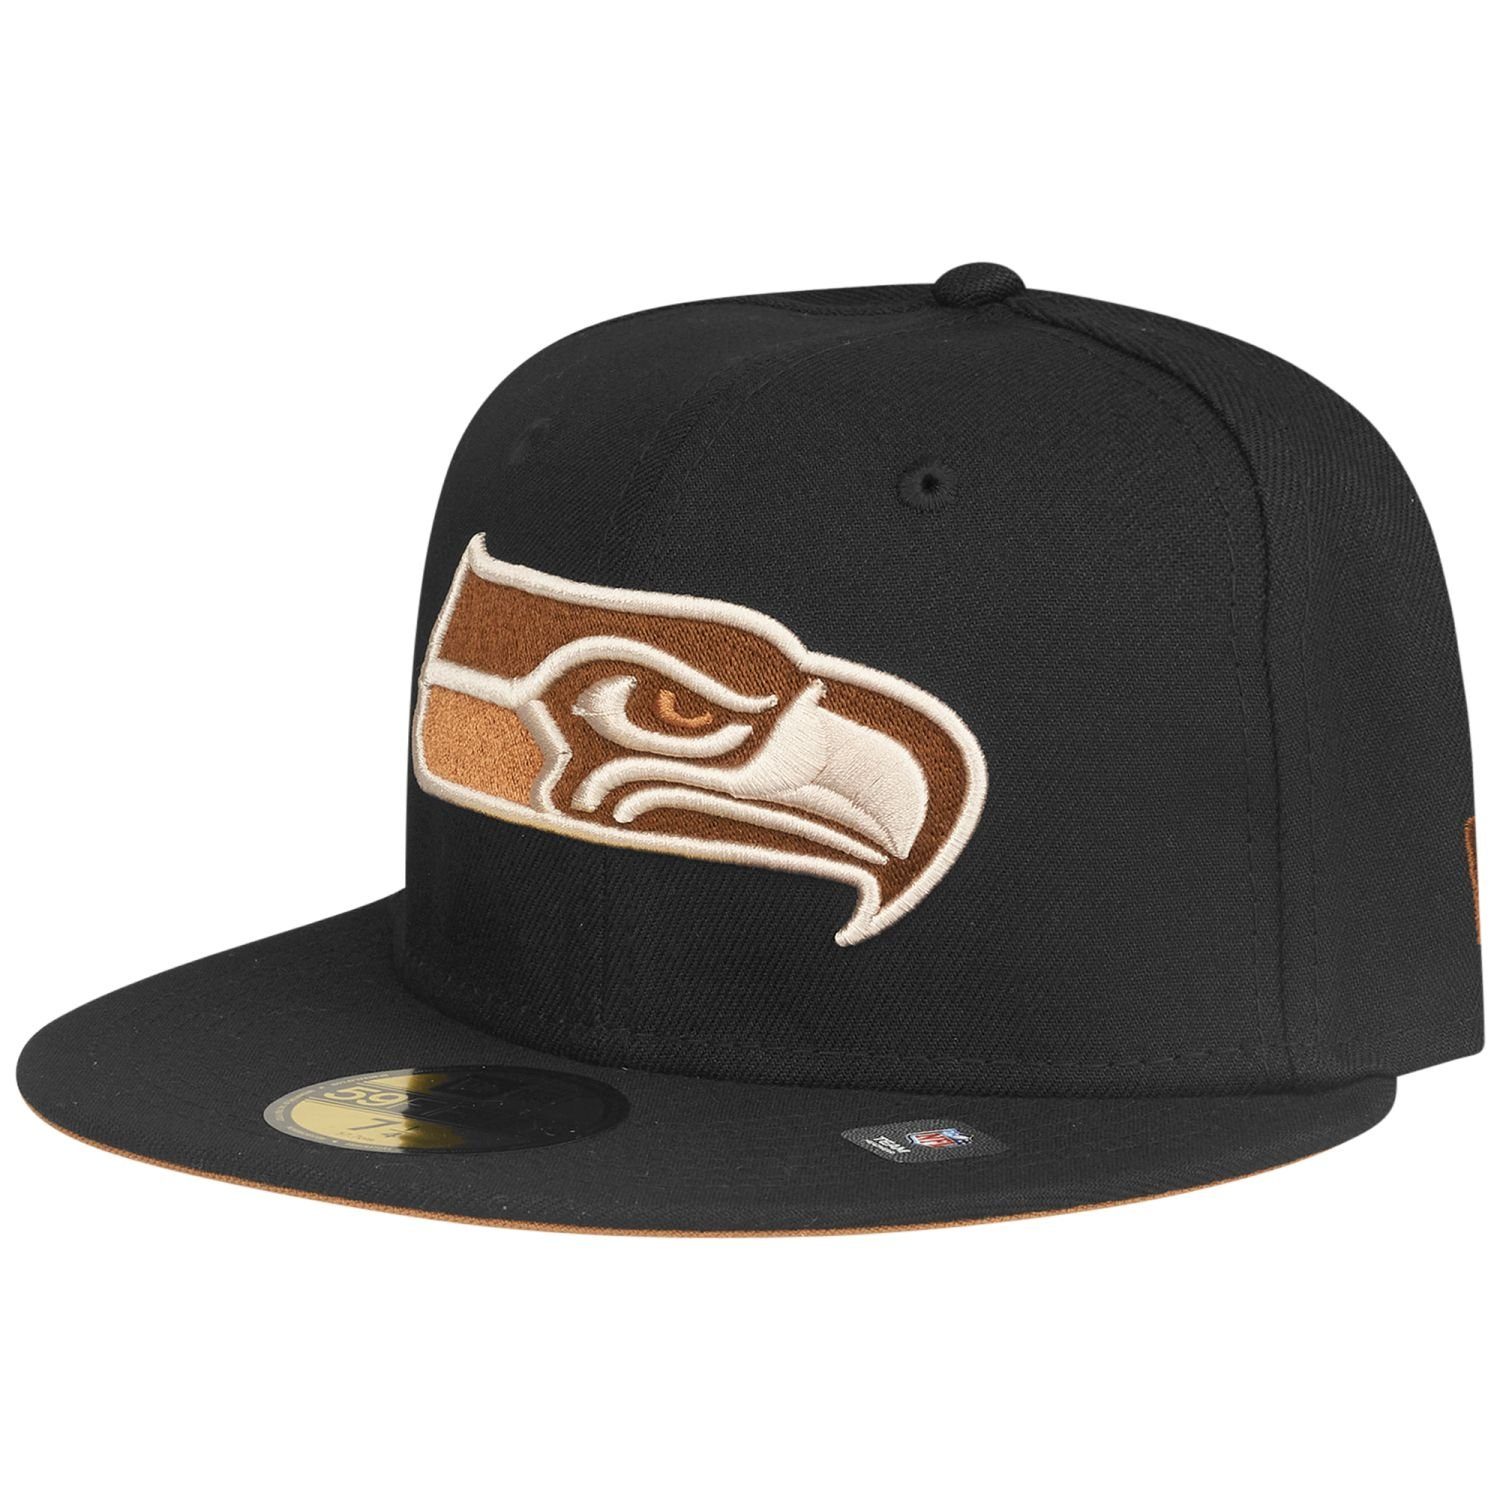 Superbowl Cap Seahawks Era Seattle New 59Fifty Fitted